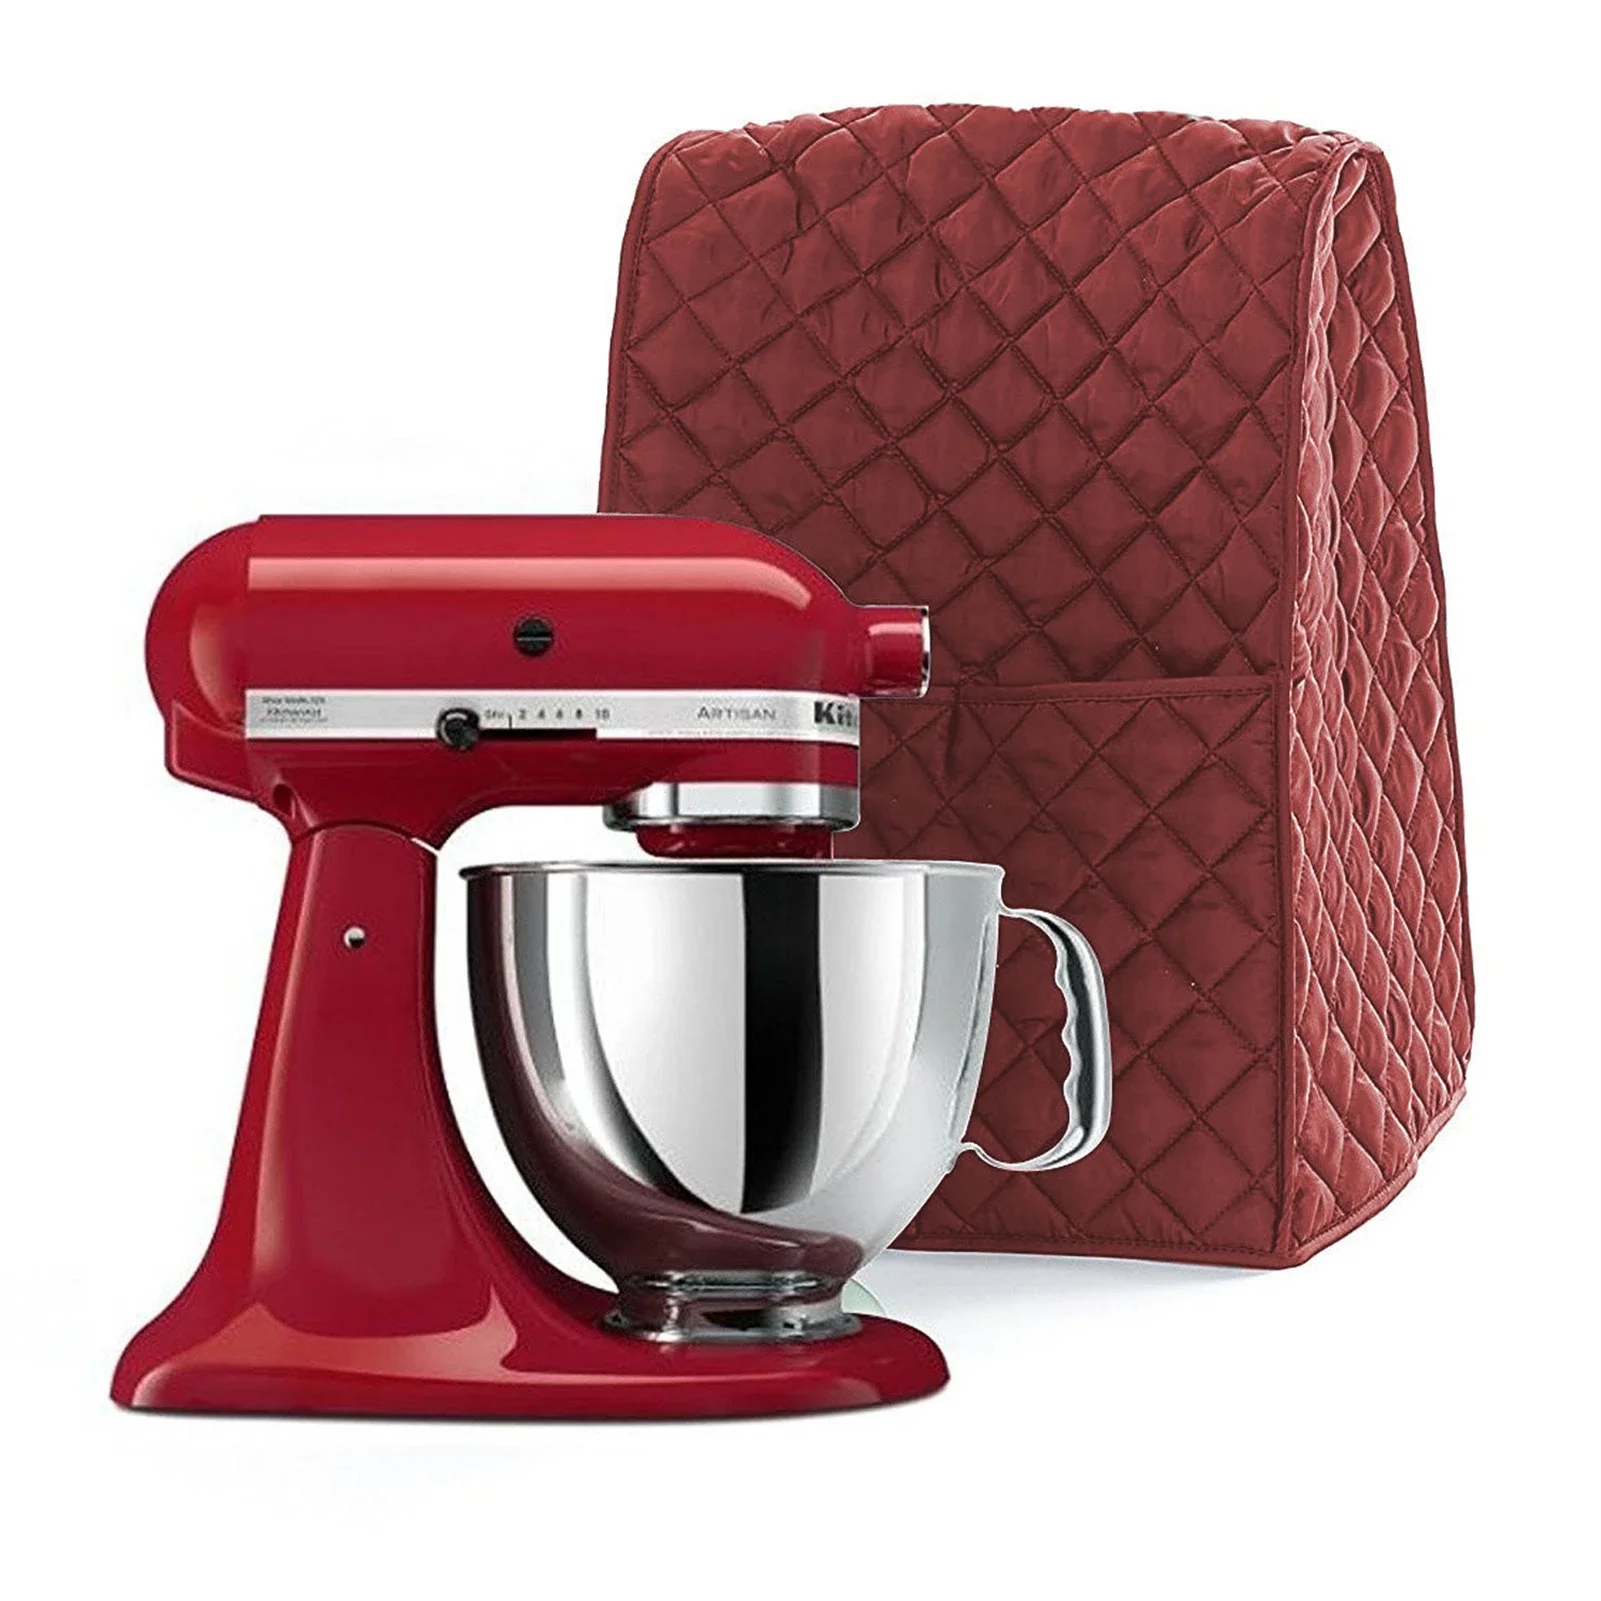 Stand Mixer Dust-proof Cover With Organizer Bag For Kitchenaid